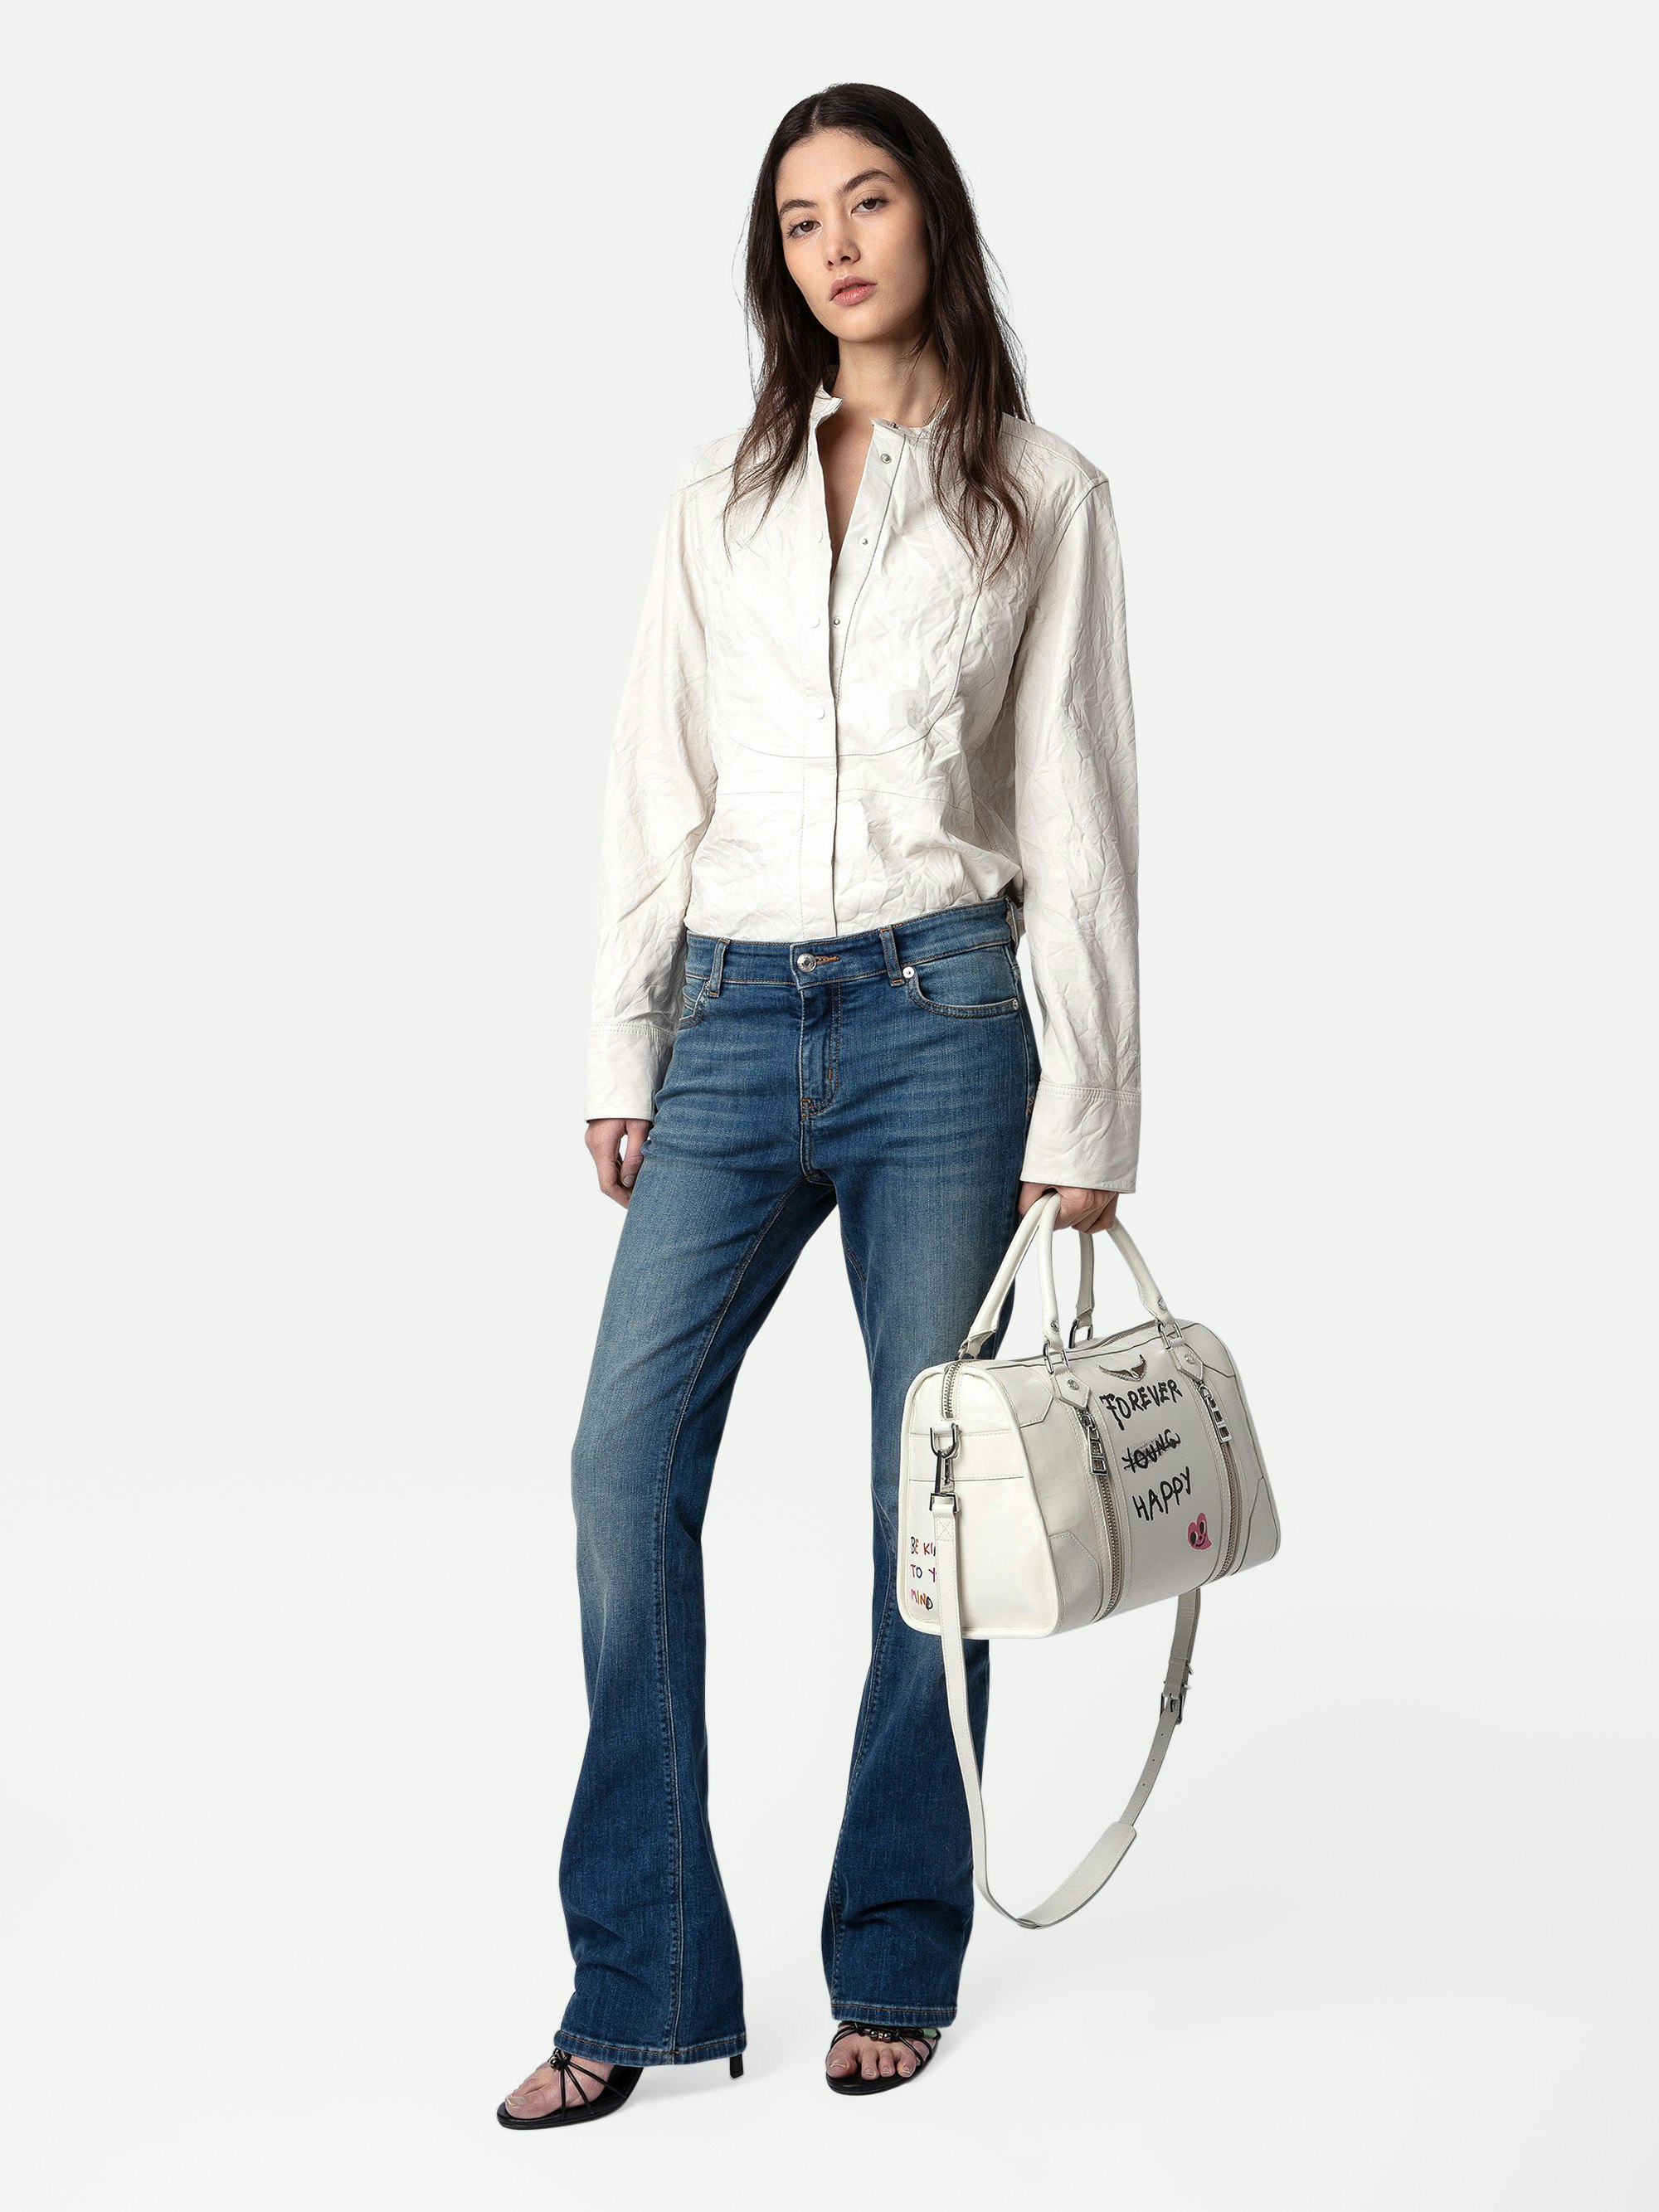 Chic Crinkled Leather Shirt - White crinkled leather shirt with press studs.